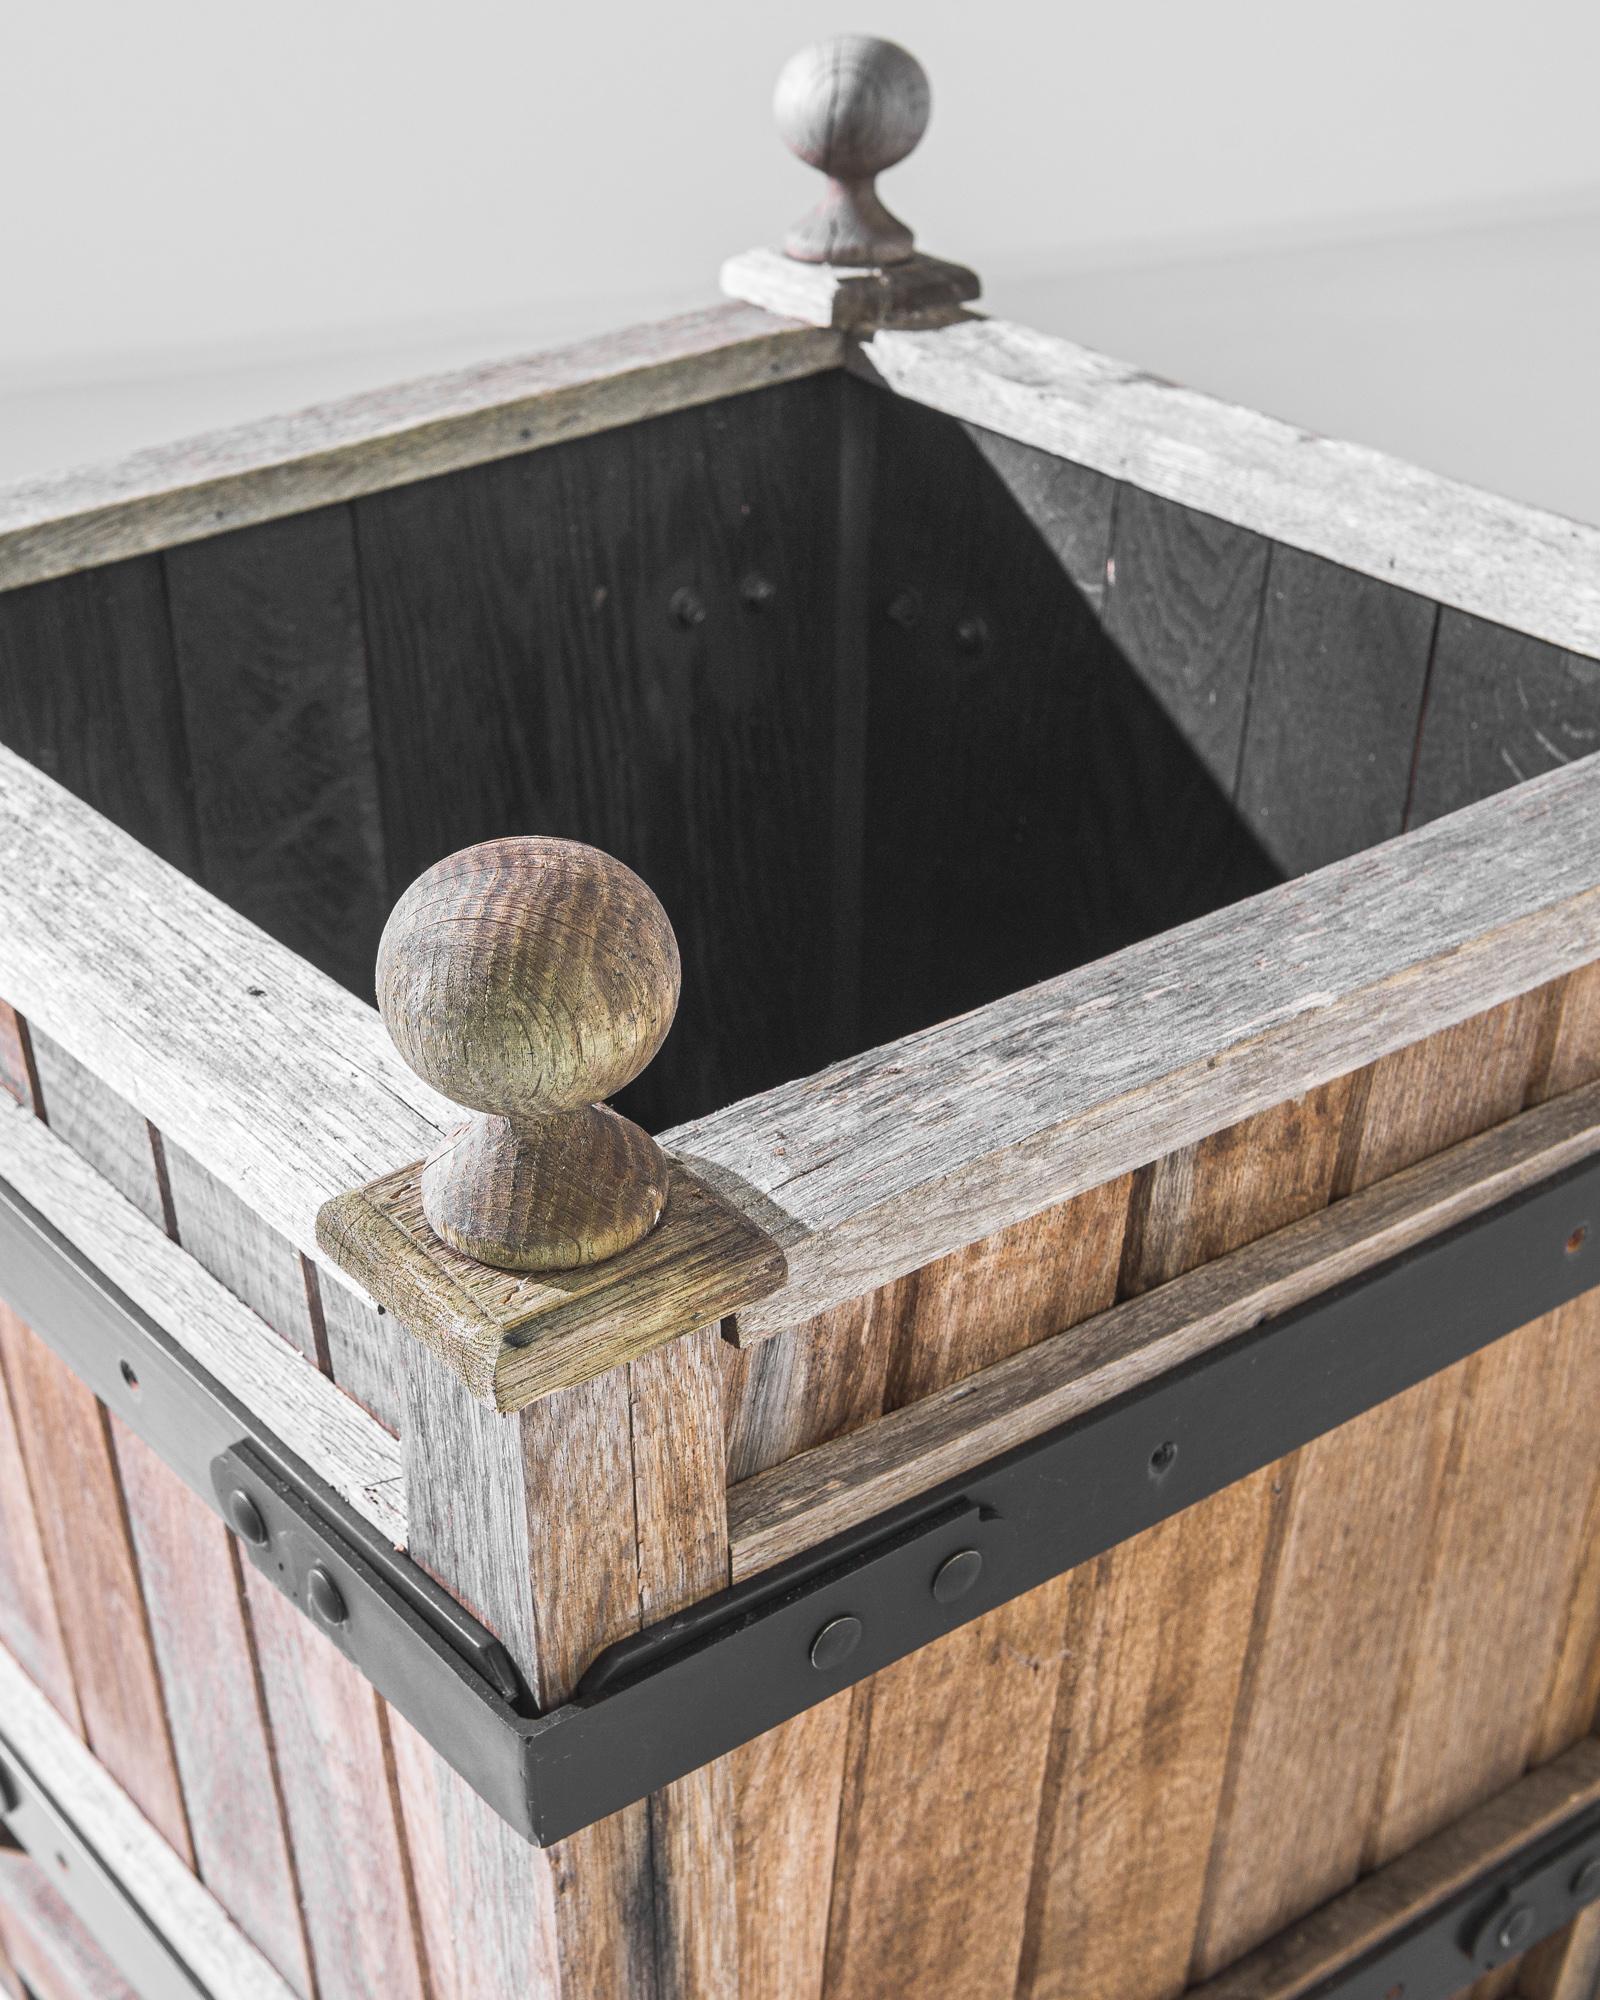 An original prototype produced in our atelier. A square barrel elevated off the ground by four short feet, this ironbound box is crowned by a quartet of pommels. Weather worn, with a dark interior to detract from dirt, this plucky planter is primed